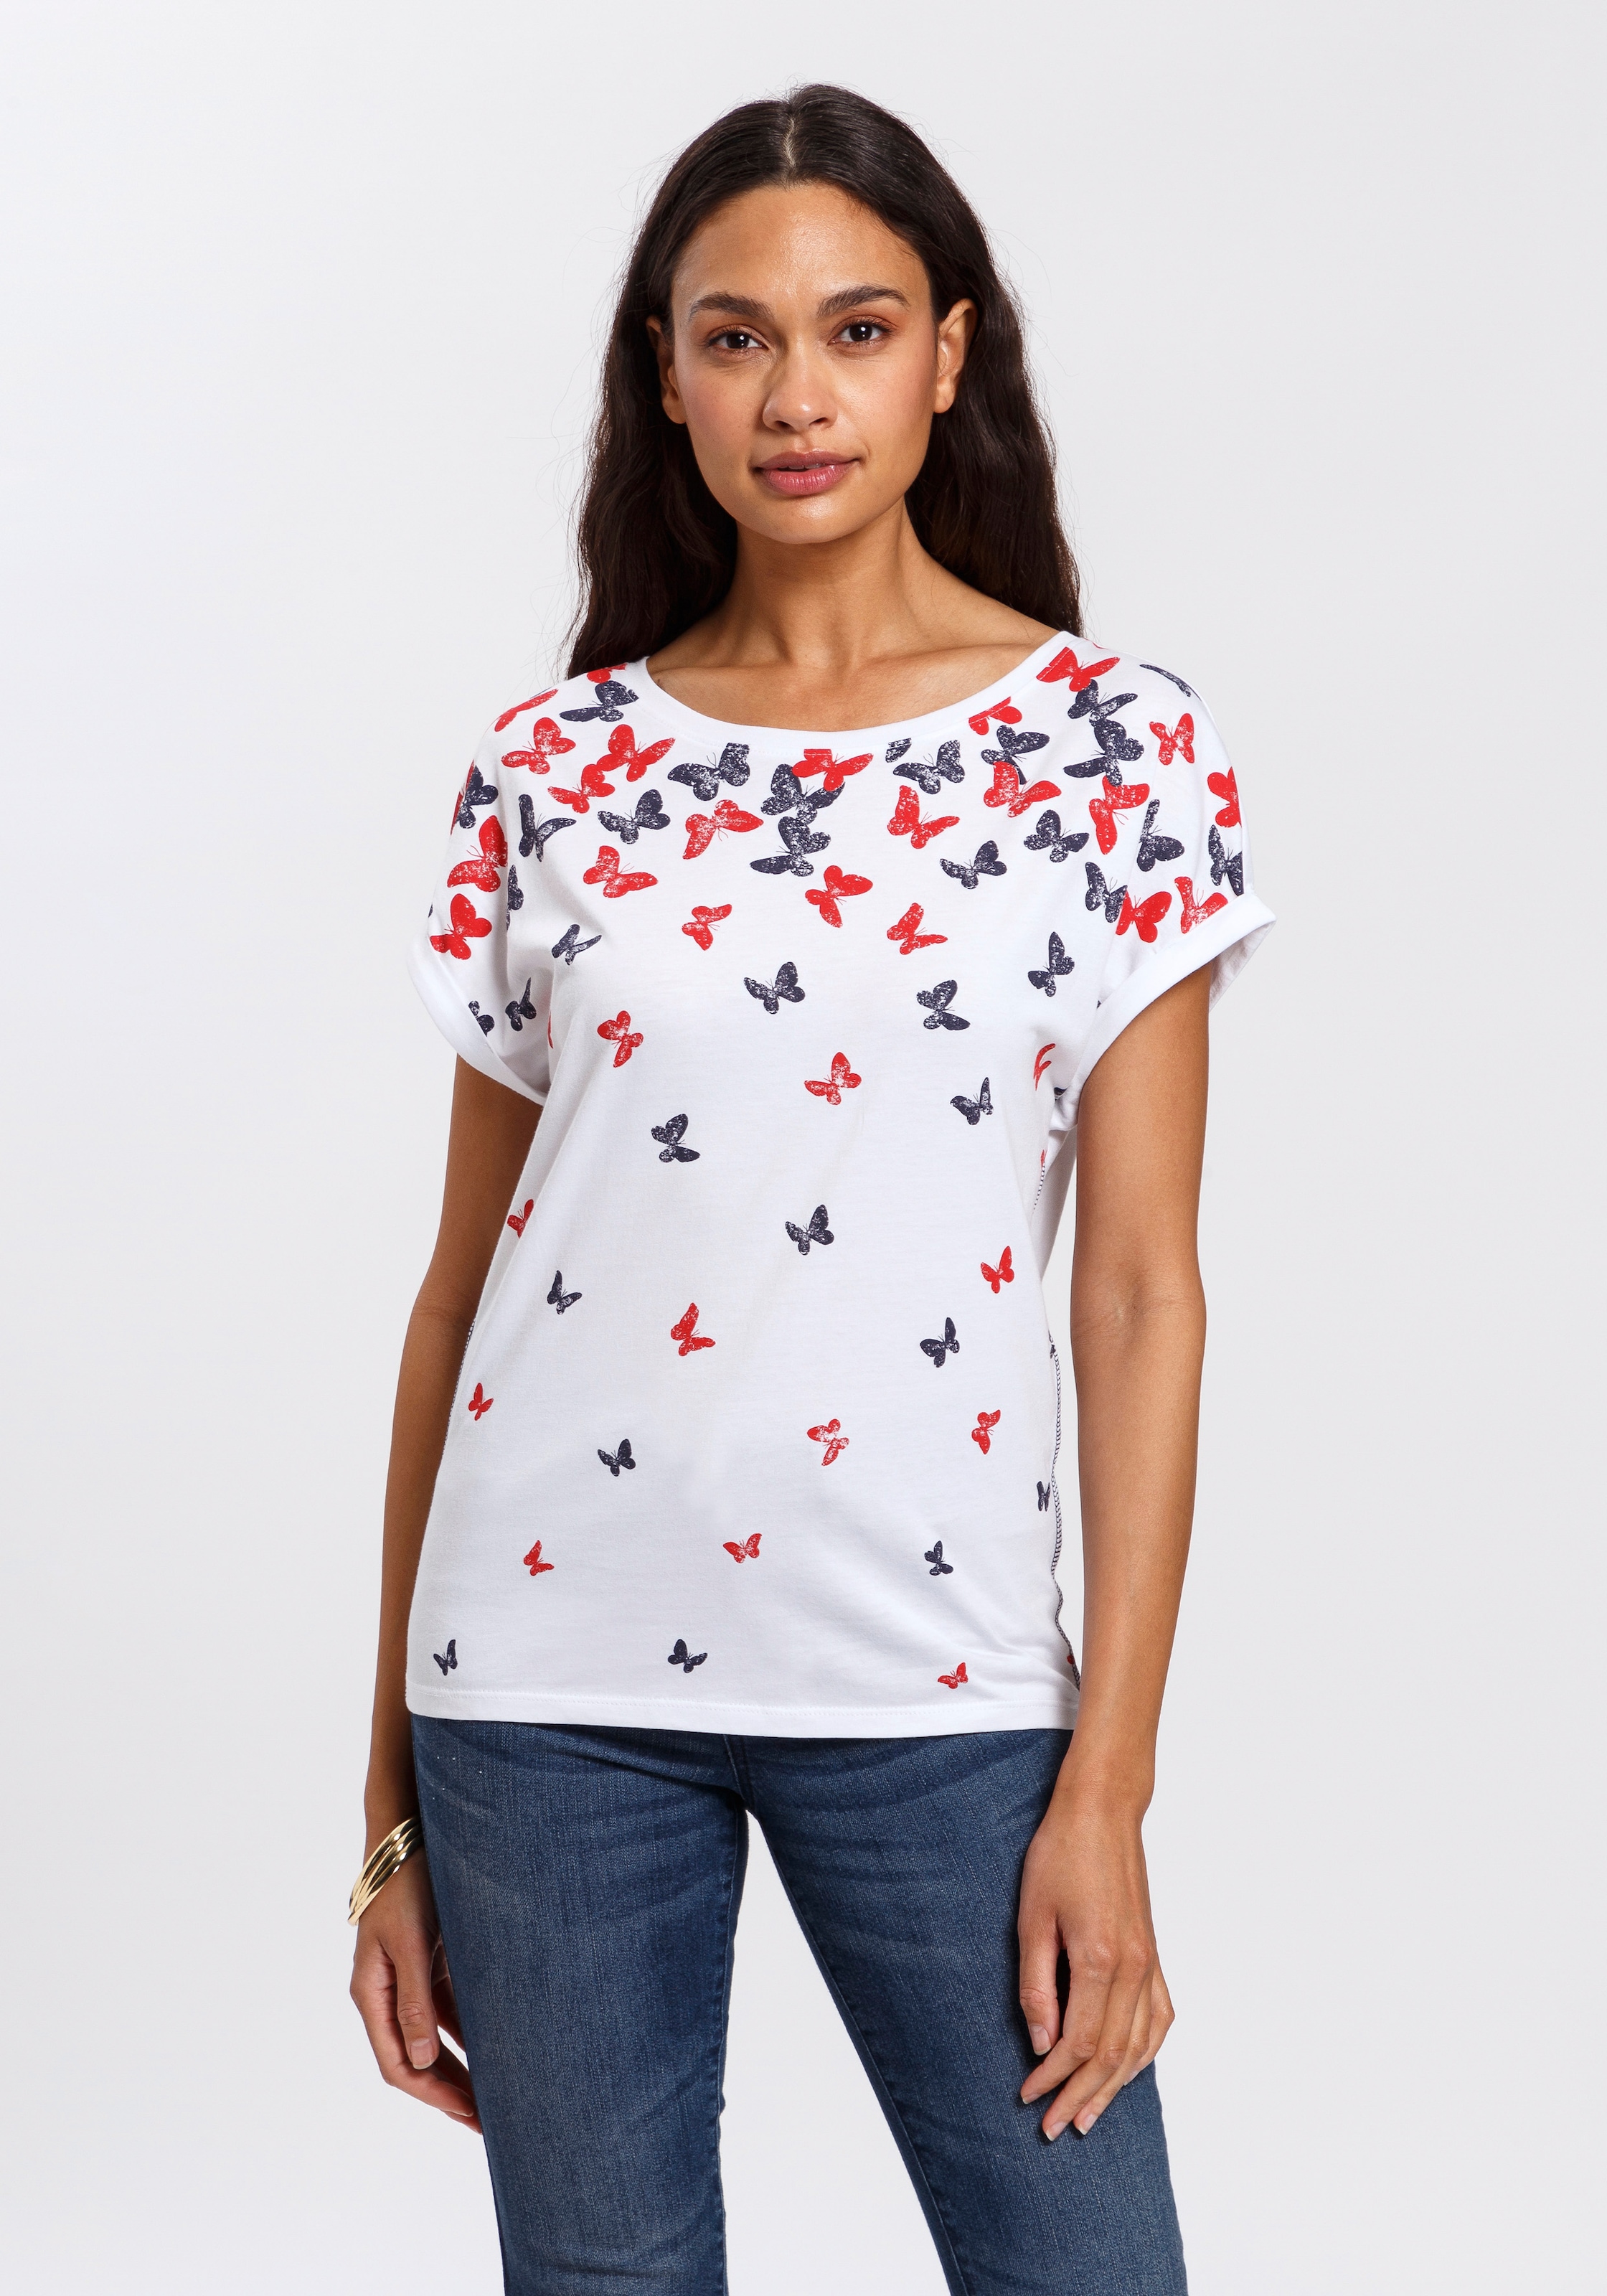 niedlichem bei TOM Polo Print Team All-Over ♕ TAILOR T-Shirt, mit